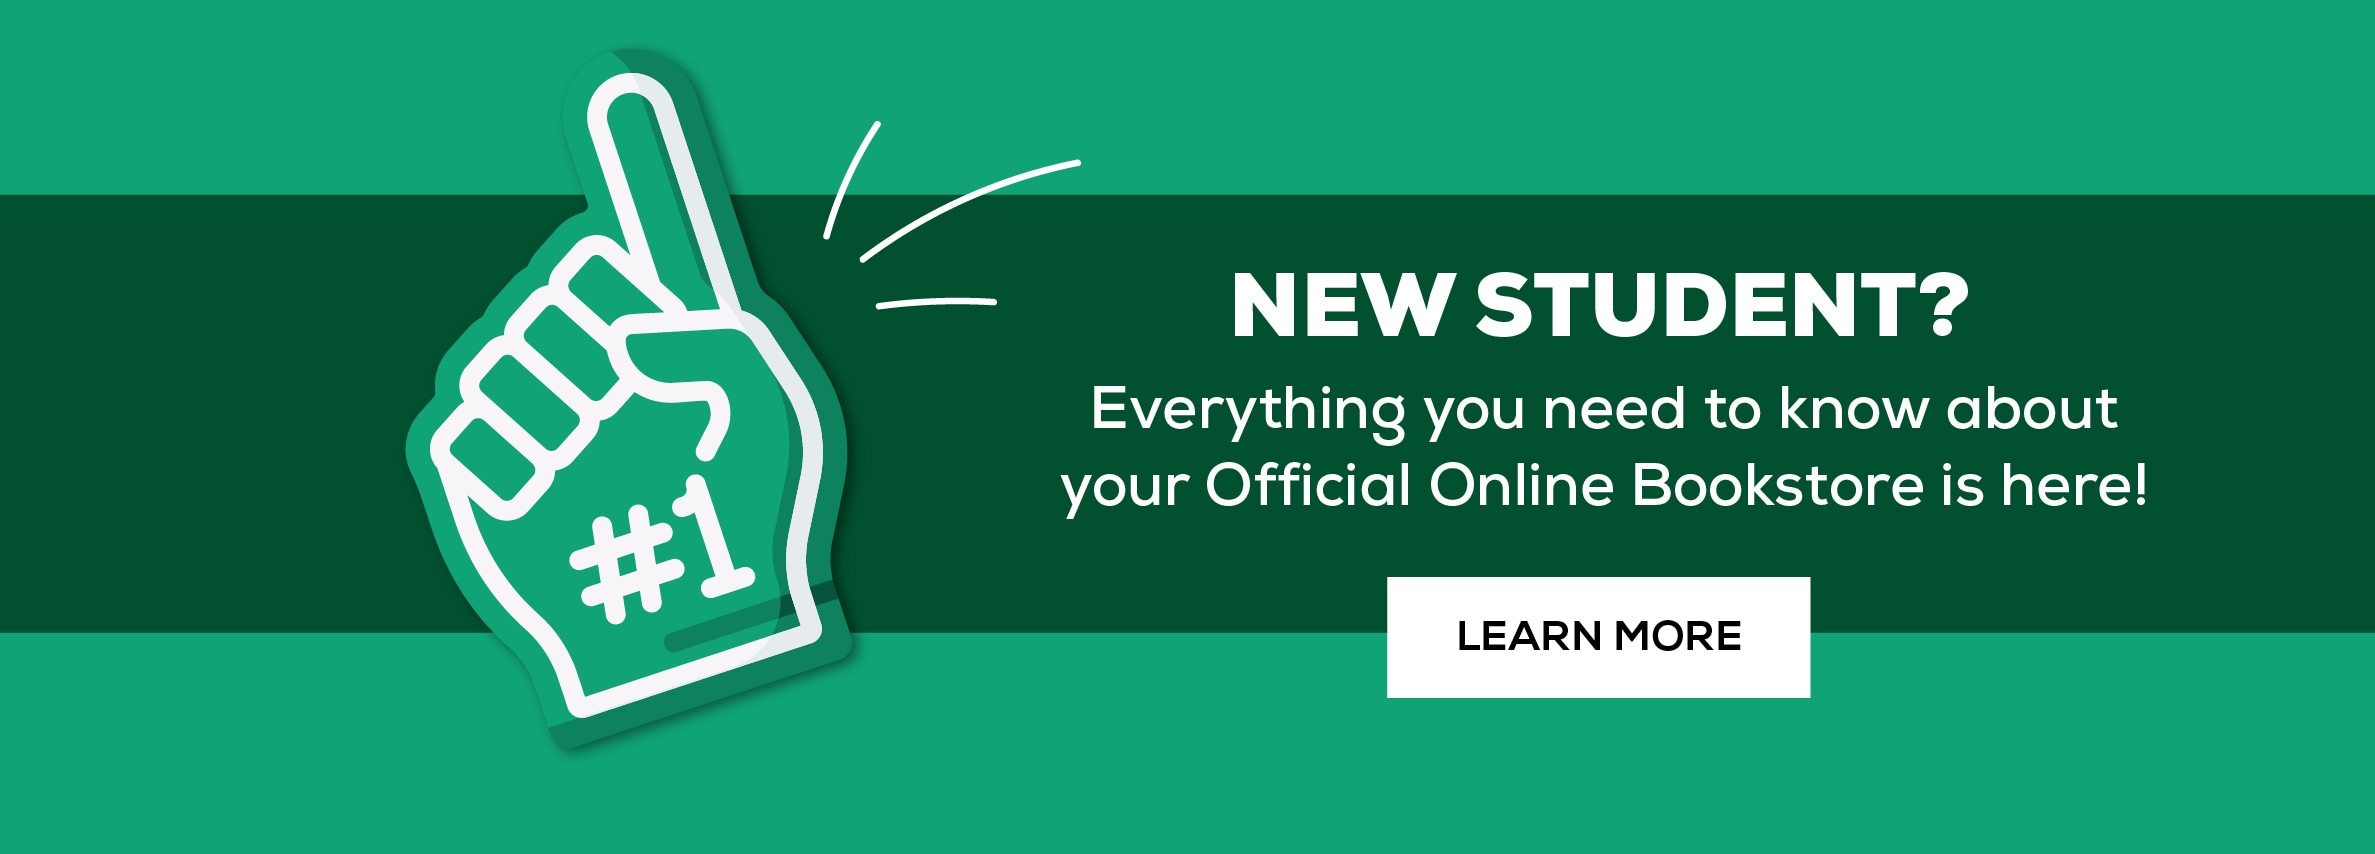 New Student Everything you need to know about your official online bookstore is here - learn more